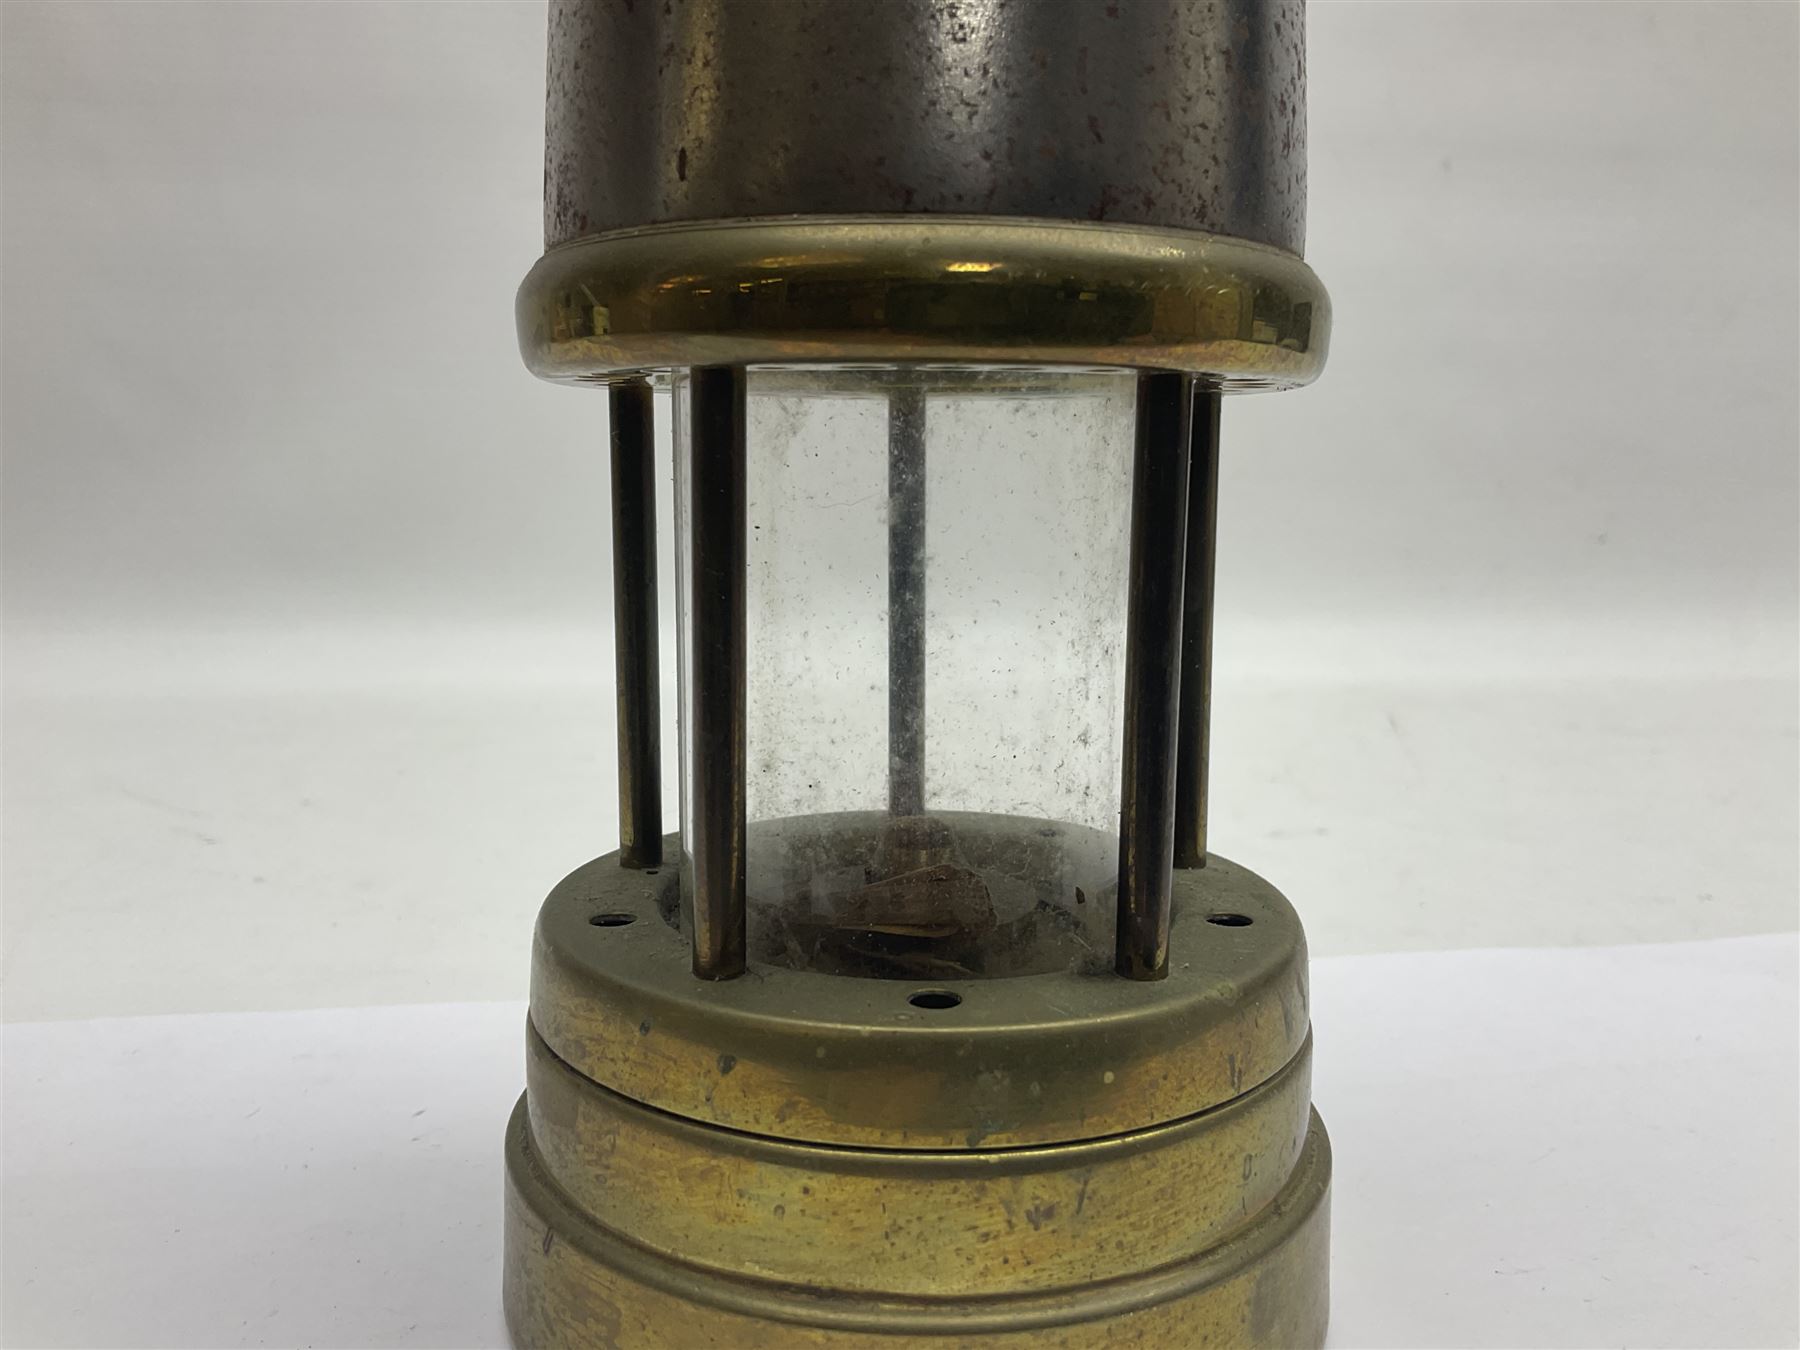 HCC yellow painted railway lamp and a British Coal Mining Company Wales brass miners lamp - Image 11 of 14